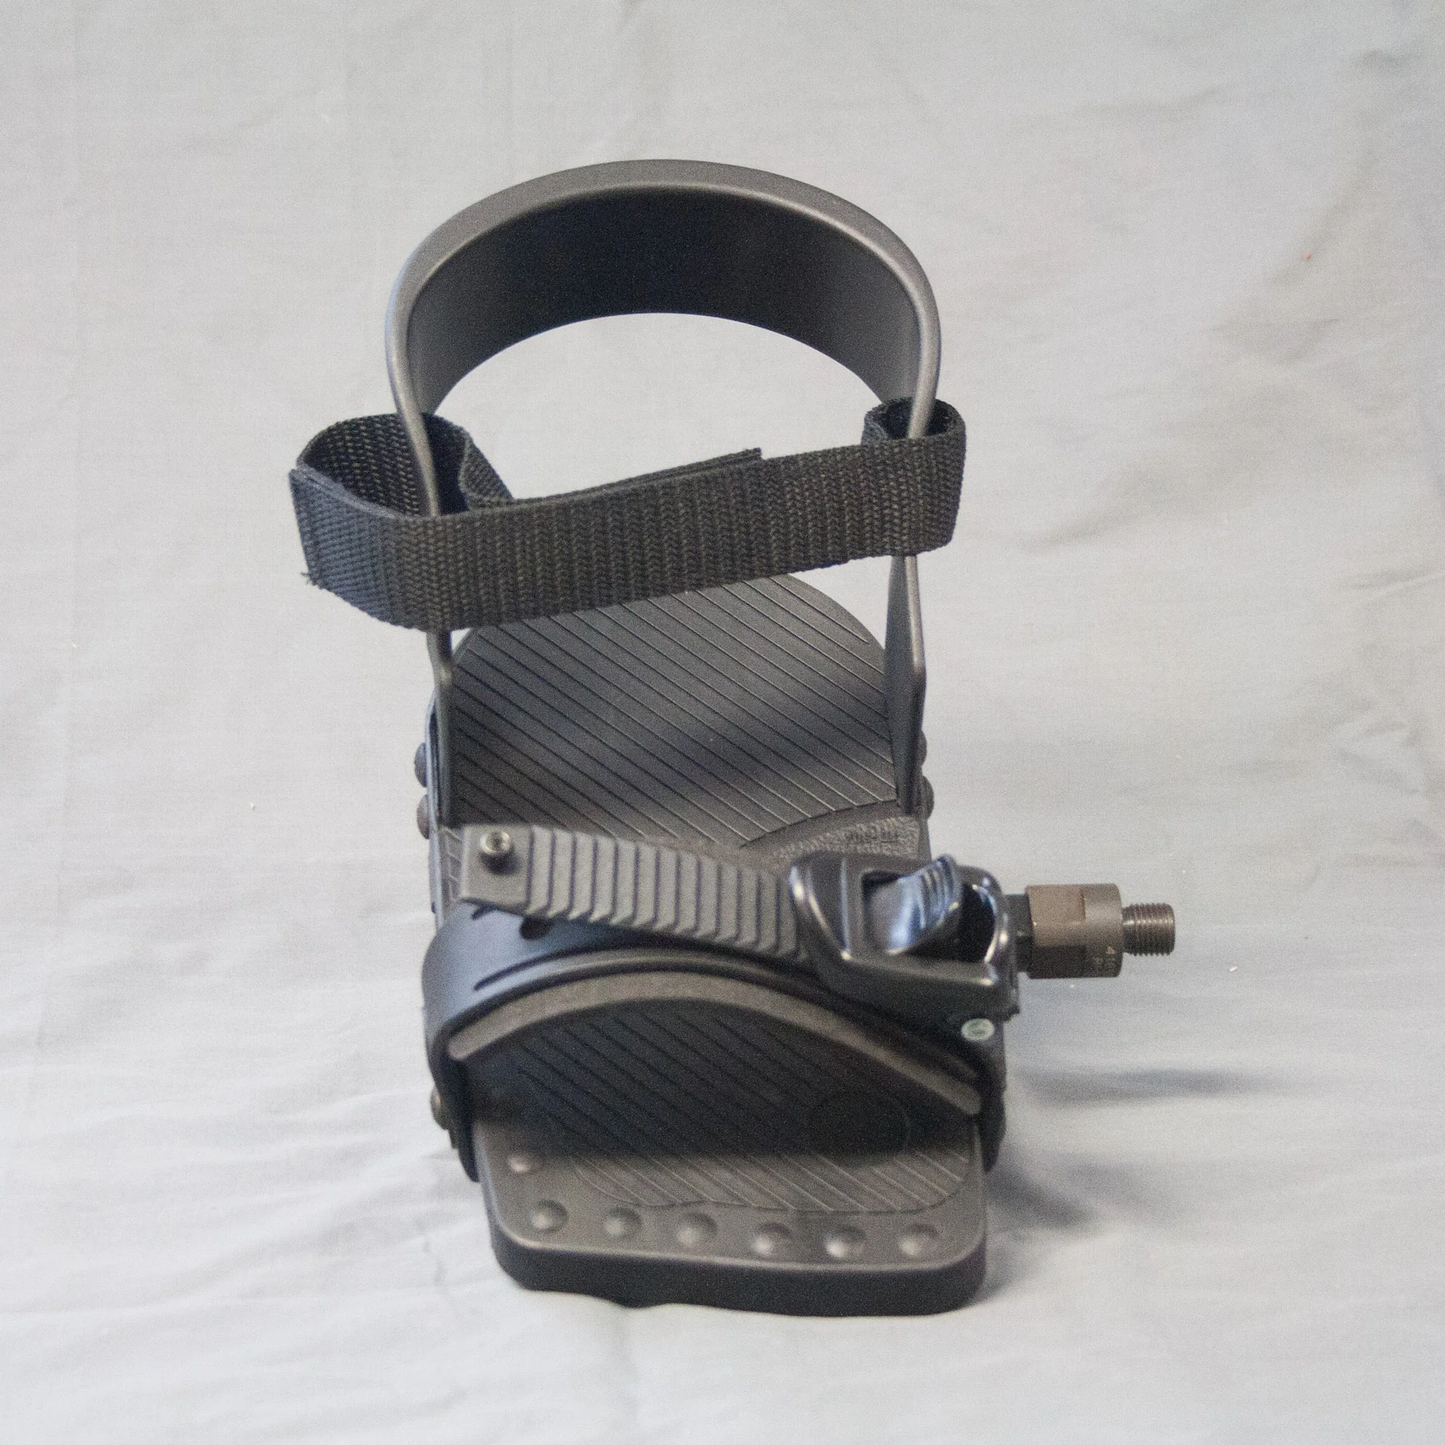 Sandal style pedals for Theracycle